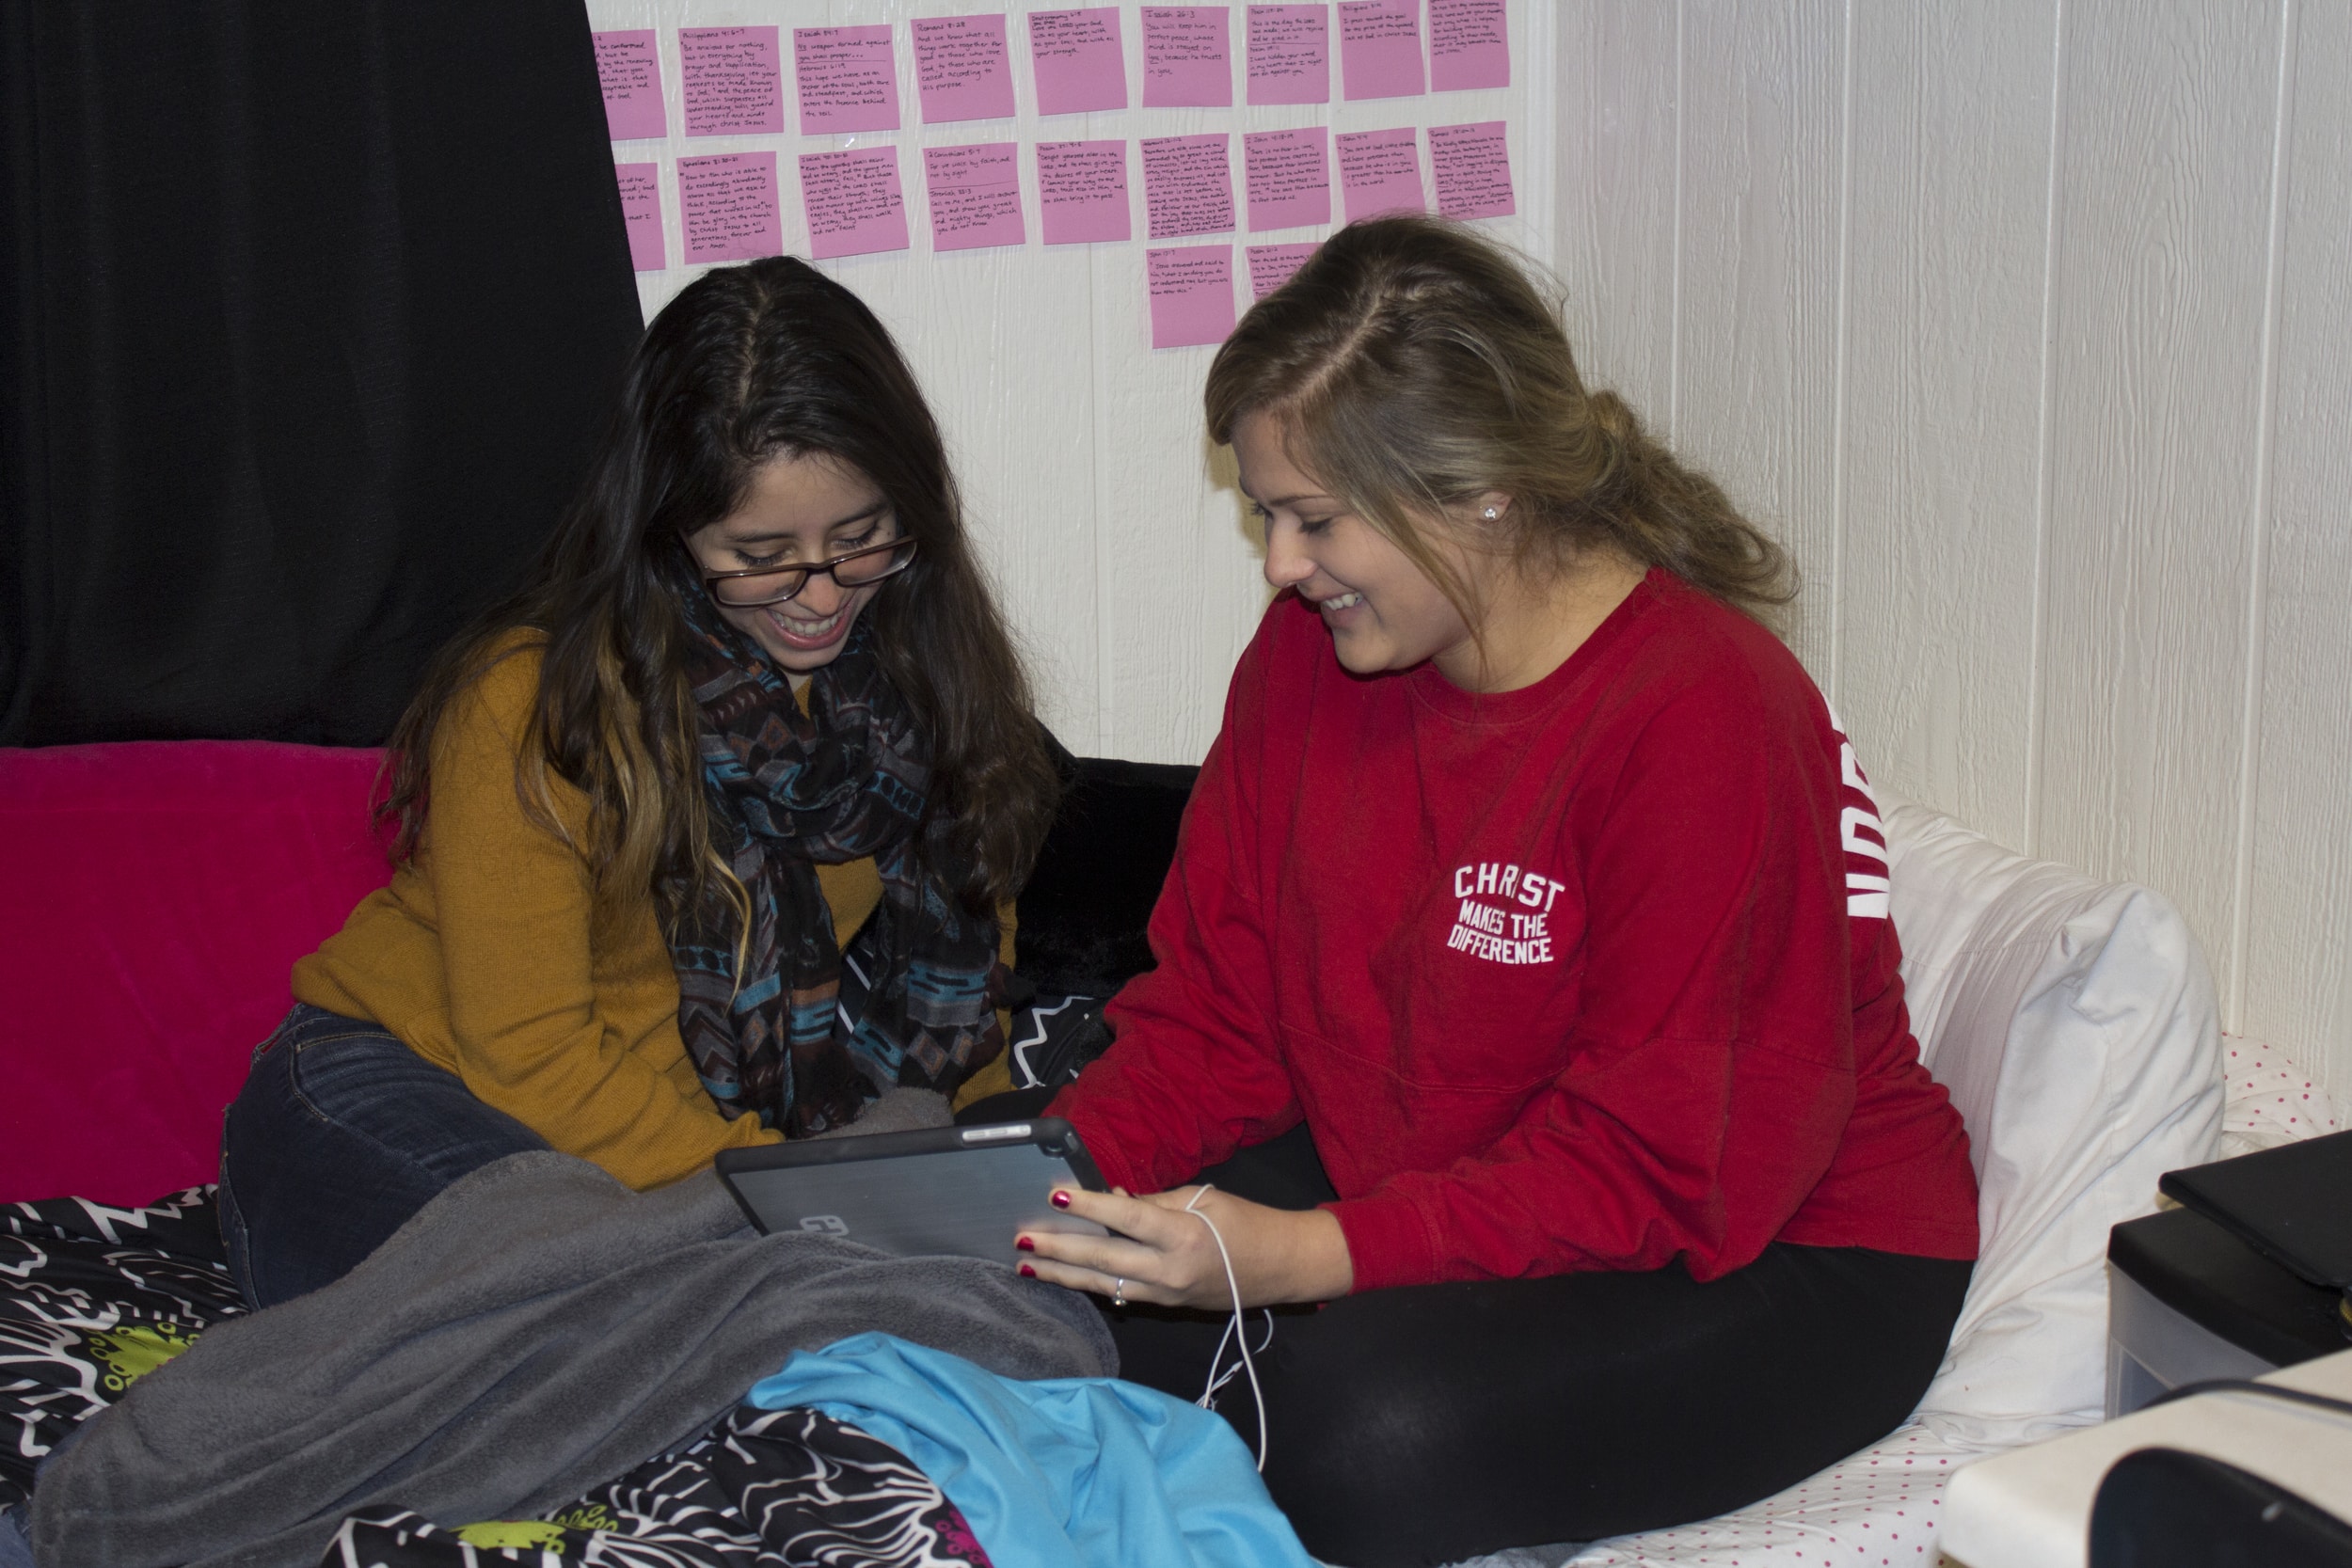  Suit mates Sophia Colmenares and Rachael Cooper enjoy the open dorm night by relaxing in the room.&nbsp; 